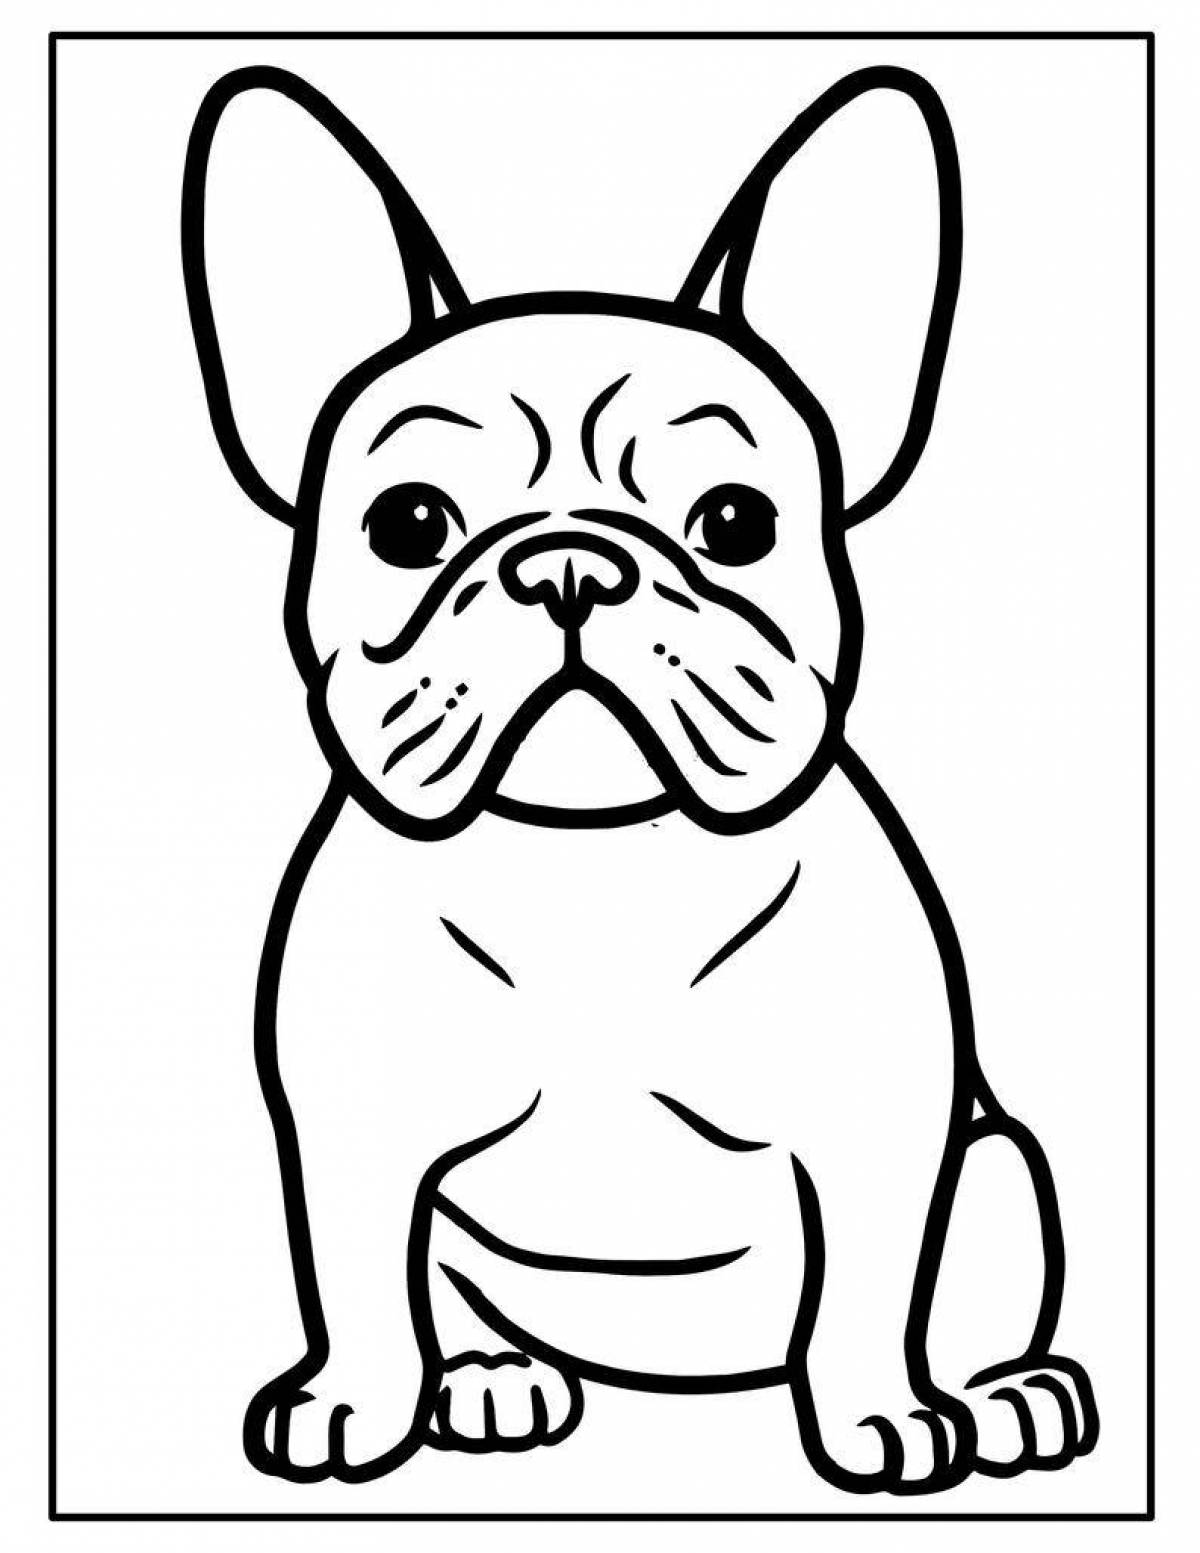 Coloring book inquisitive french bulldog